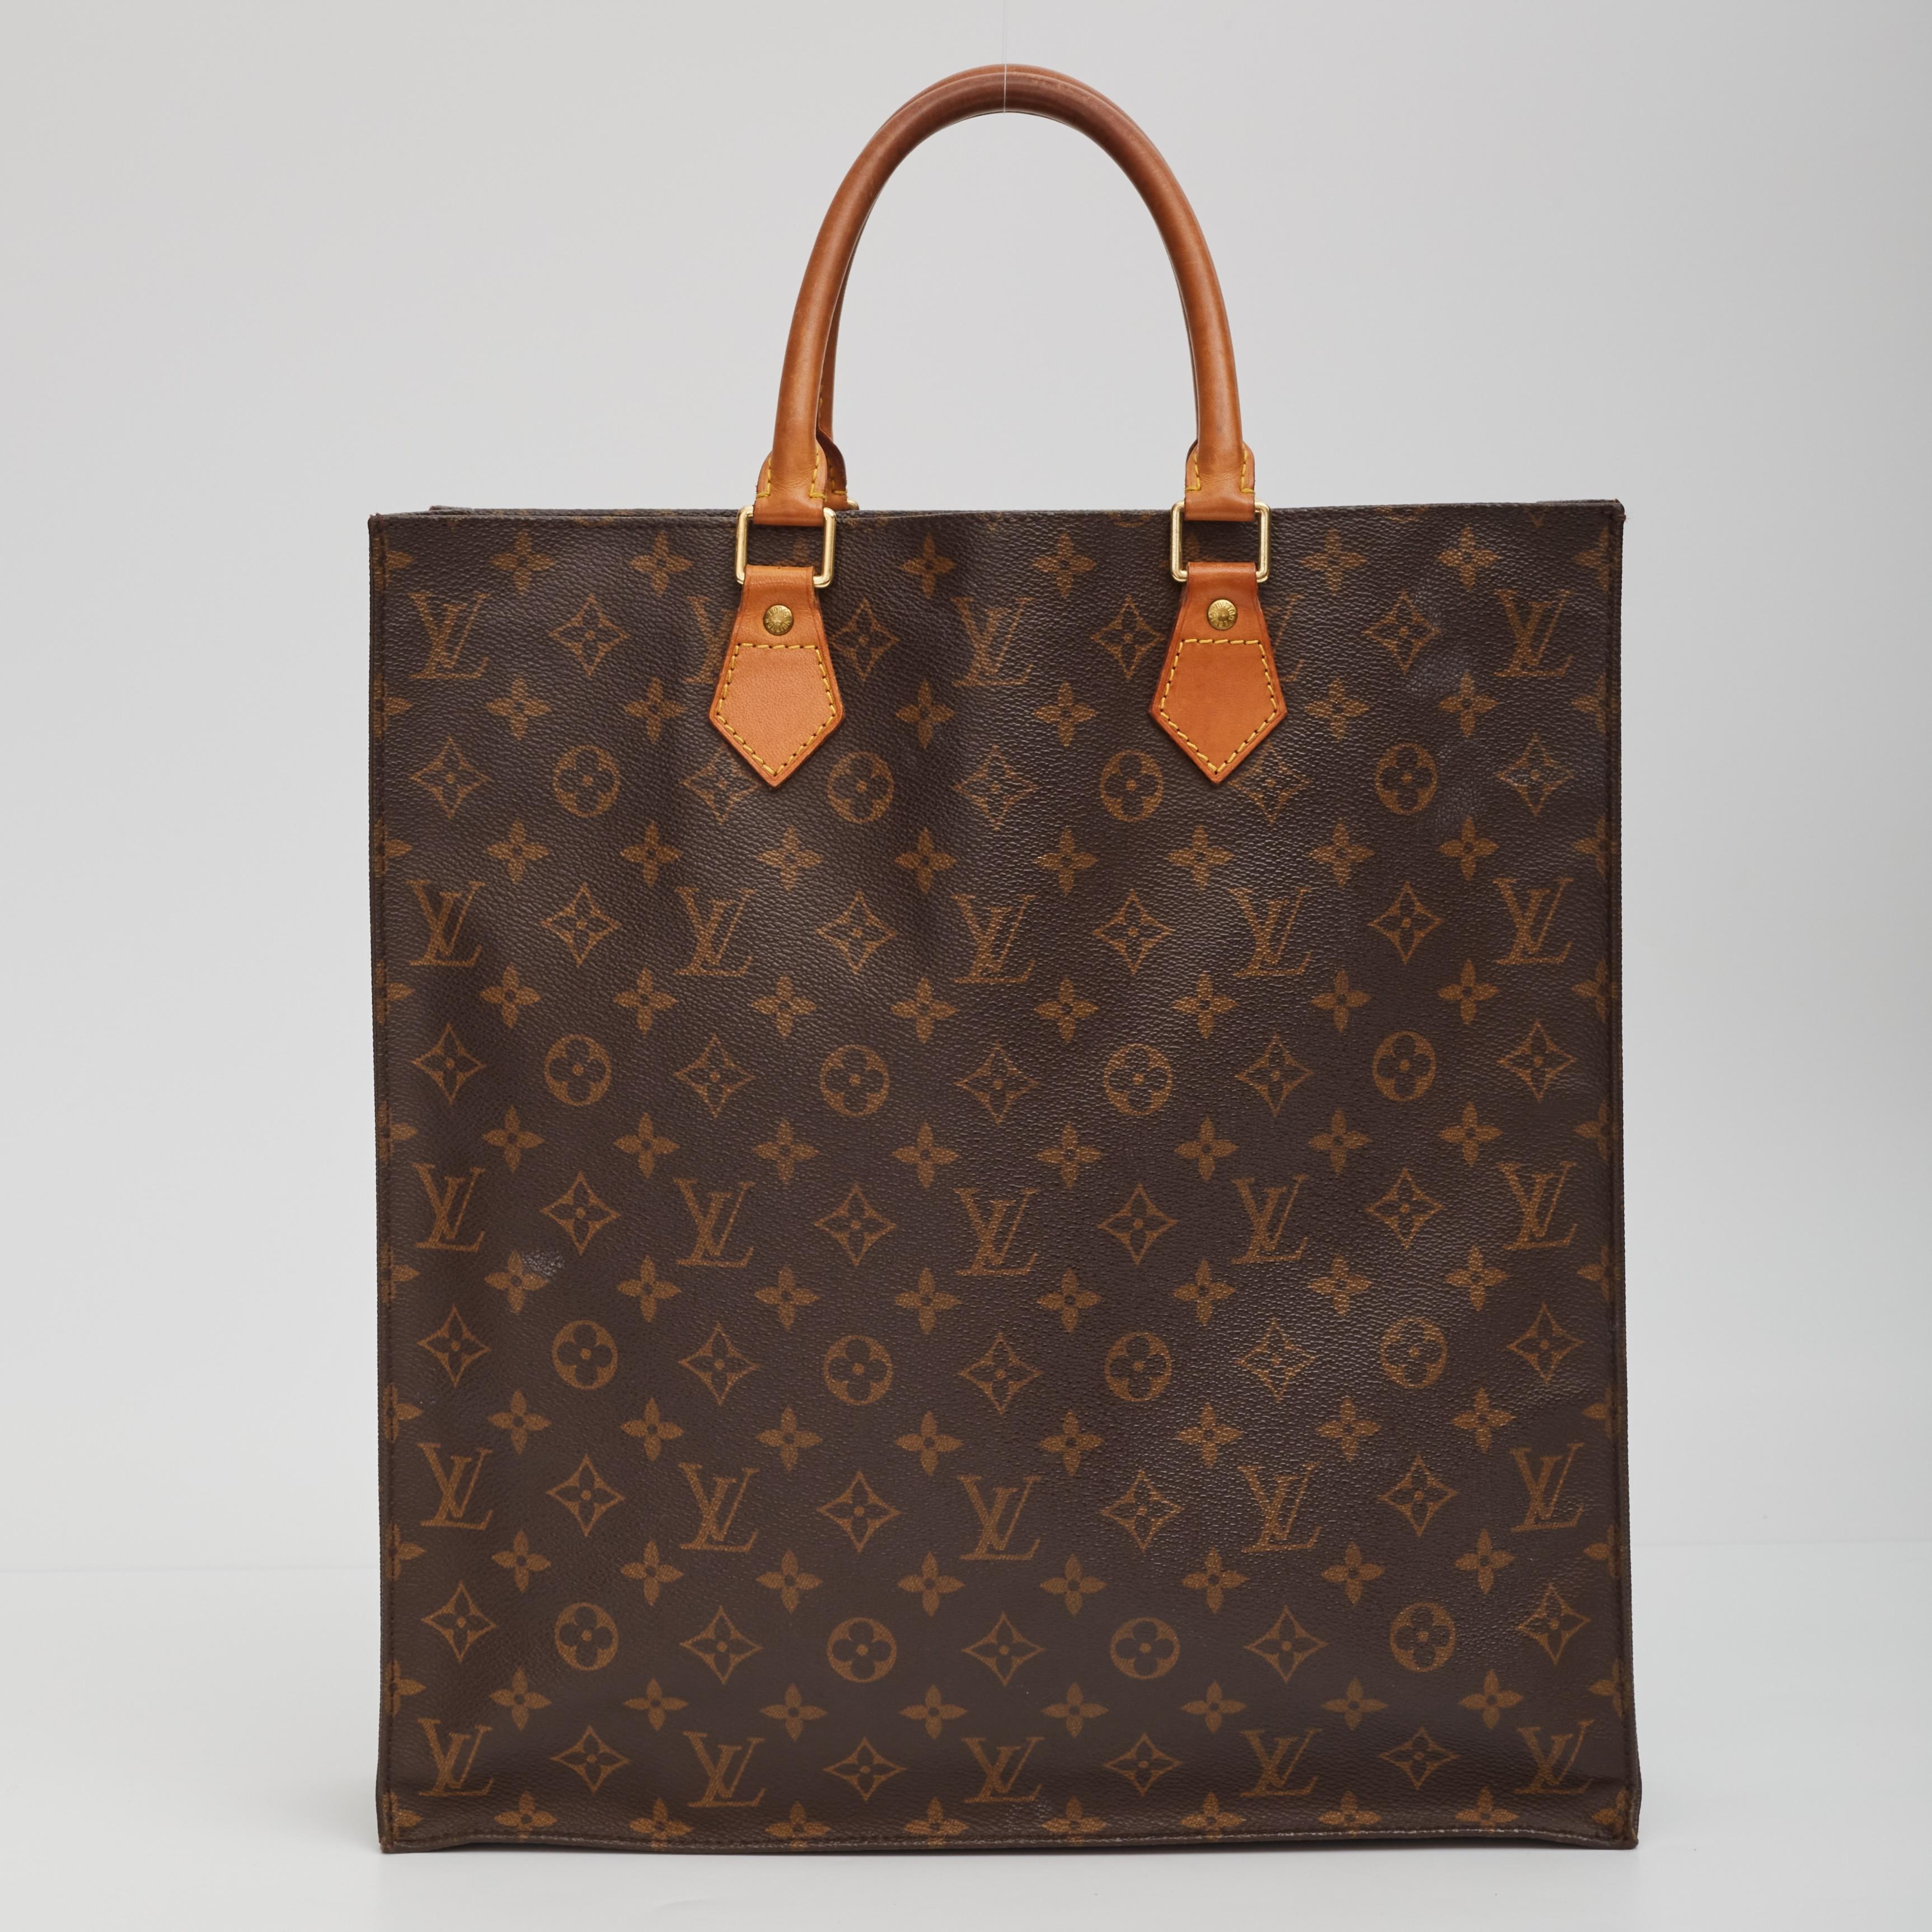 This handbag is made of classic Louis Vuitton monogram print on toile canvas. The bag features dual rolled vachetta leather top handles, brass hardware, an open top, ivory vuittonite leather lining with patch pockets.

Color: Brown
Material: Coated